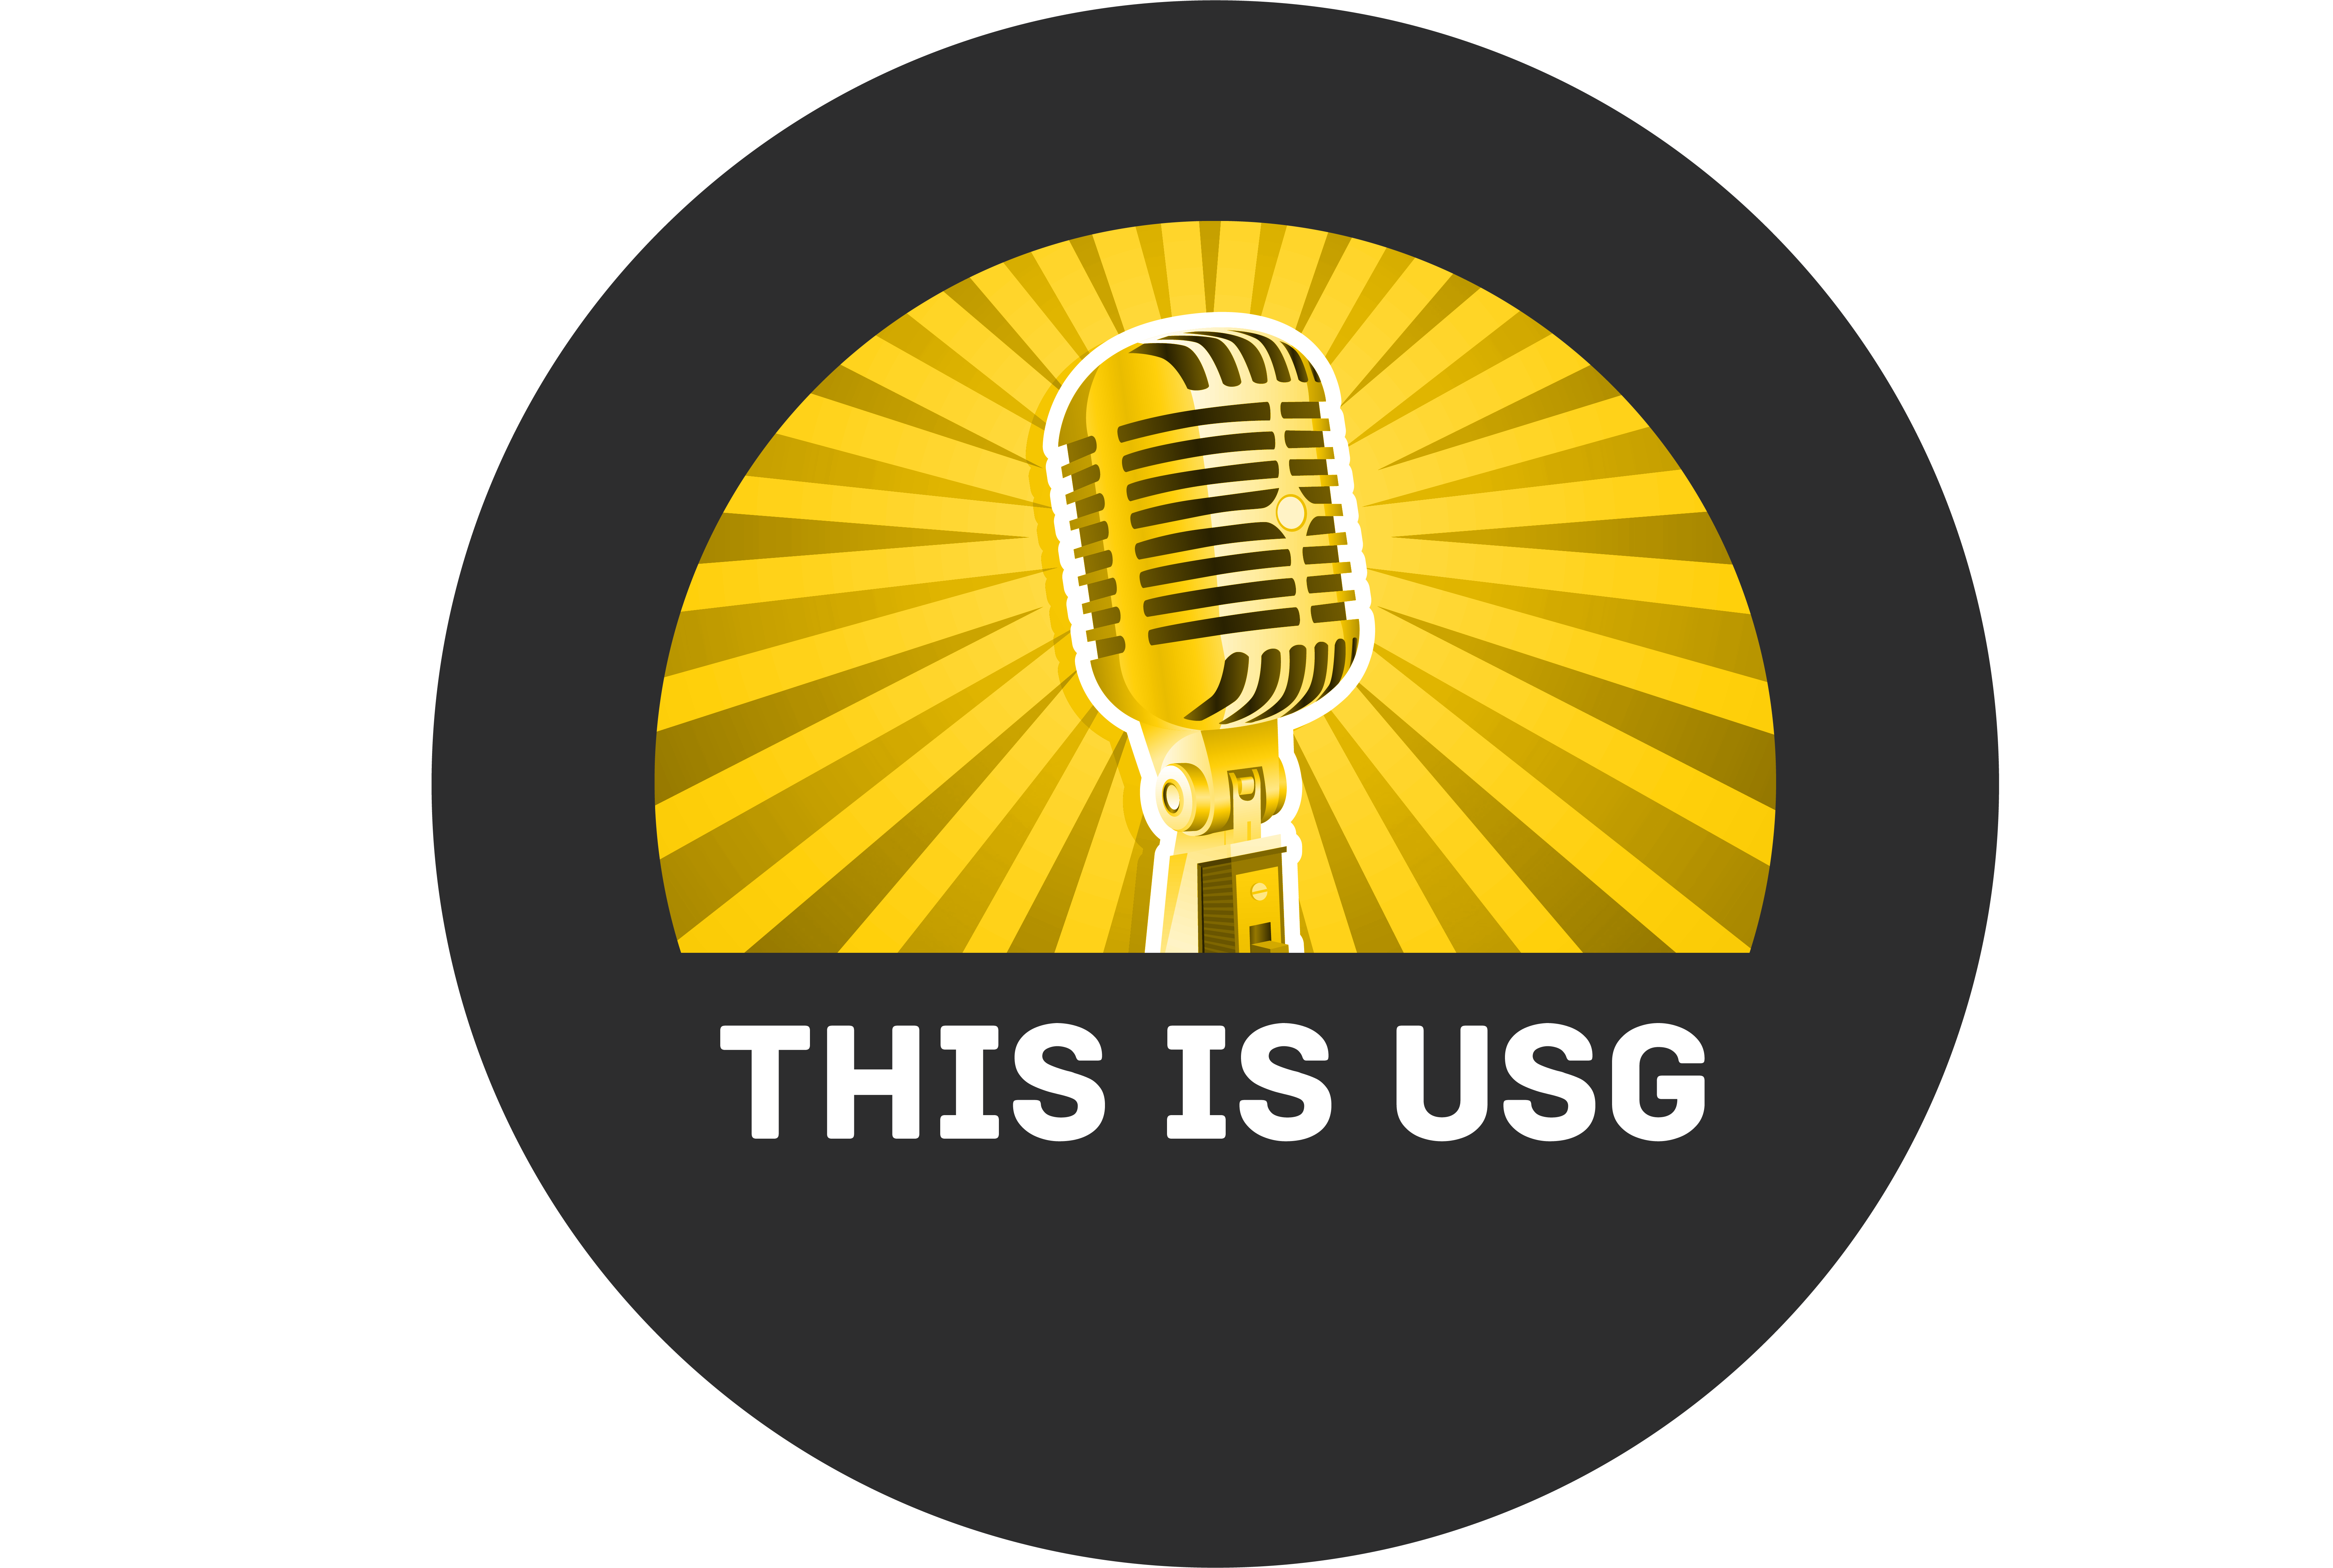 This is USG podcast